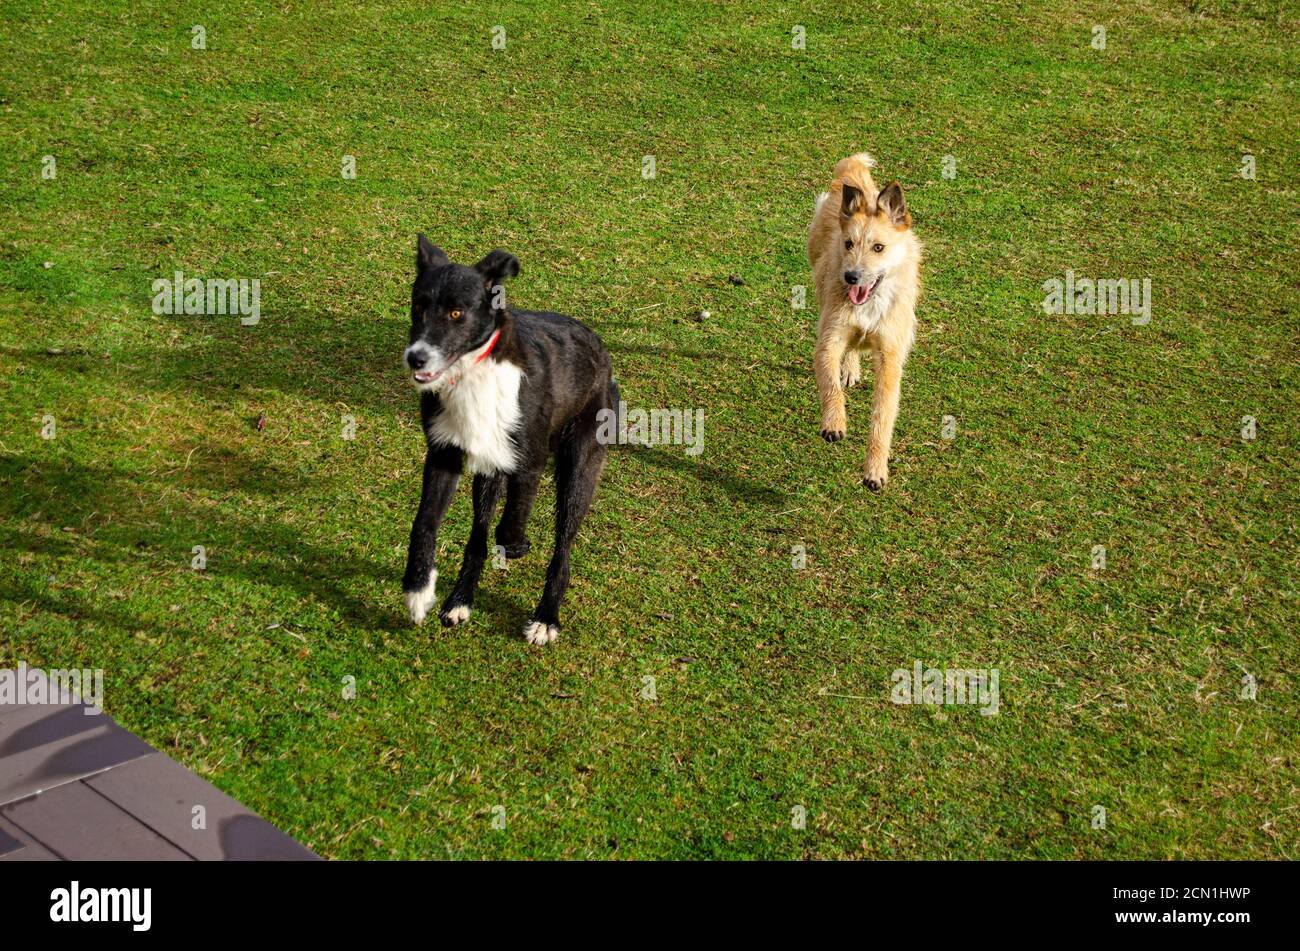 Two dogs running on the grass during the morning. Stock Photo